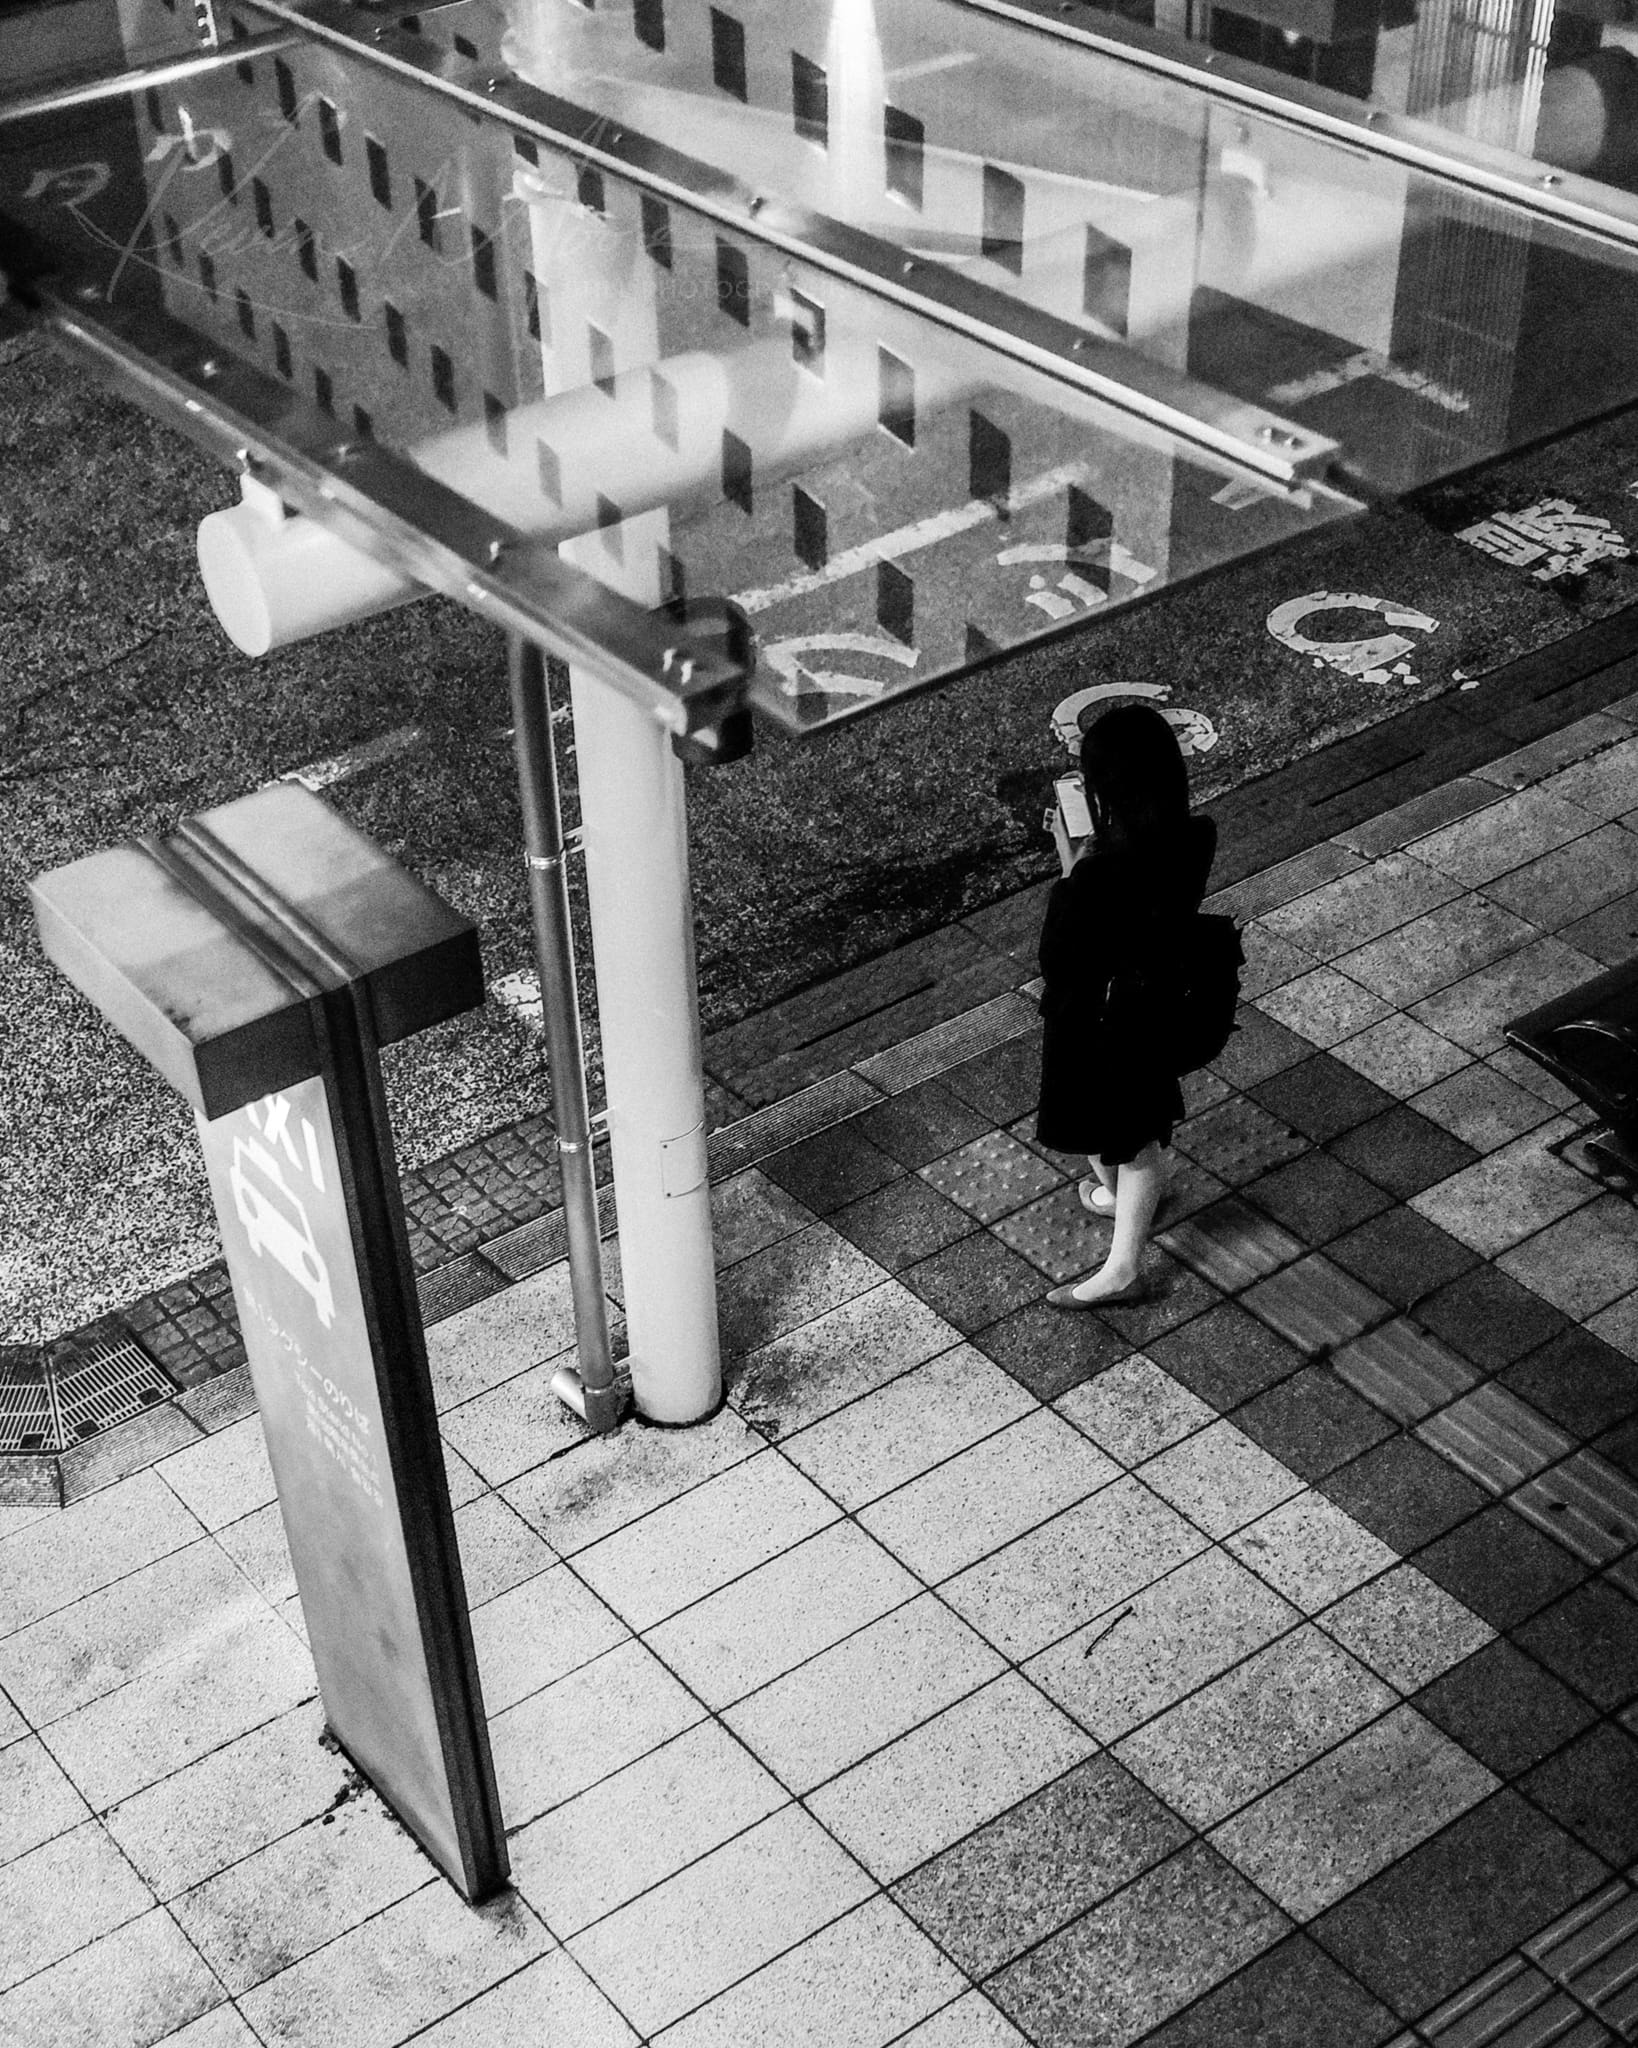 Solitary figure on tiled pavement under Japanese signboard at night.